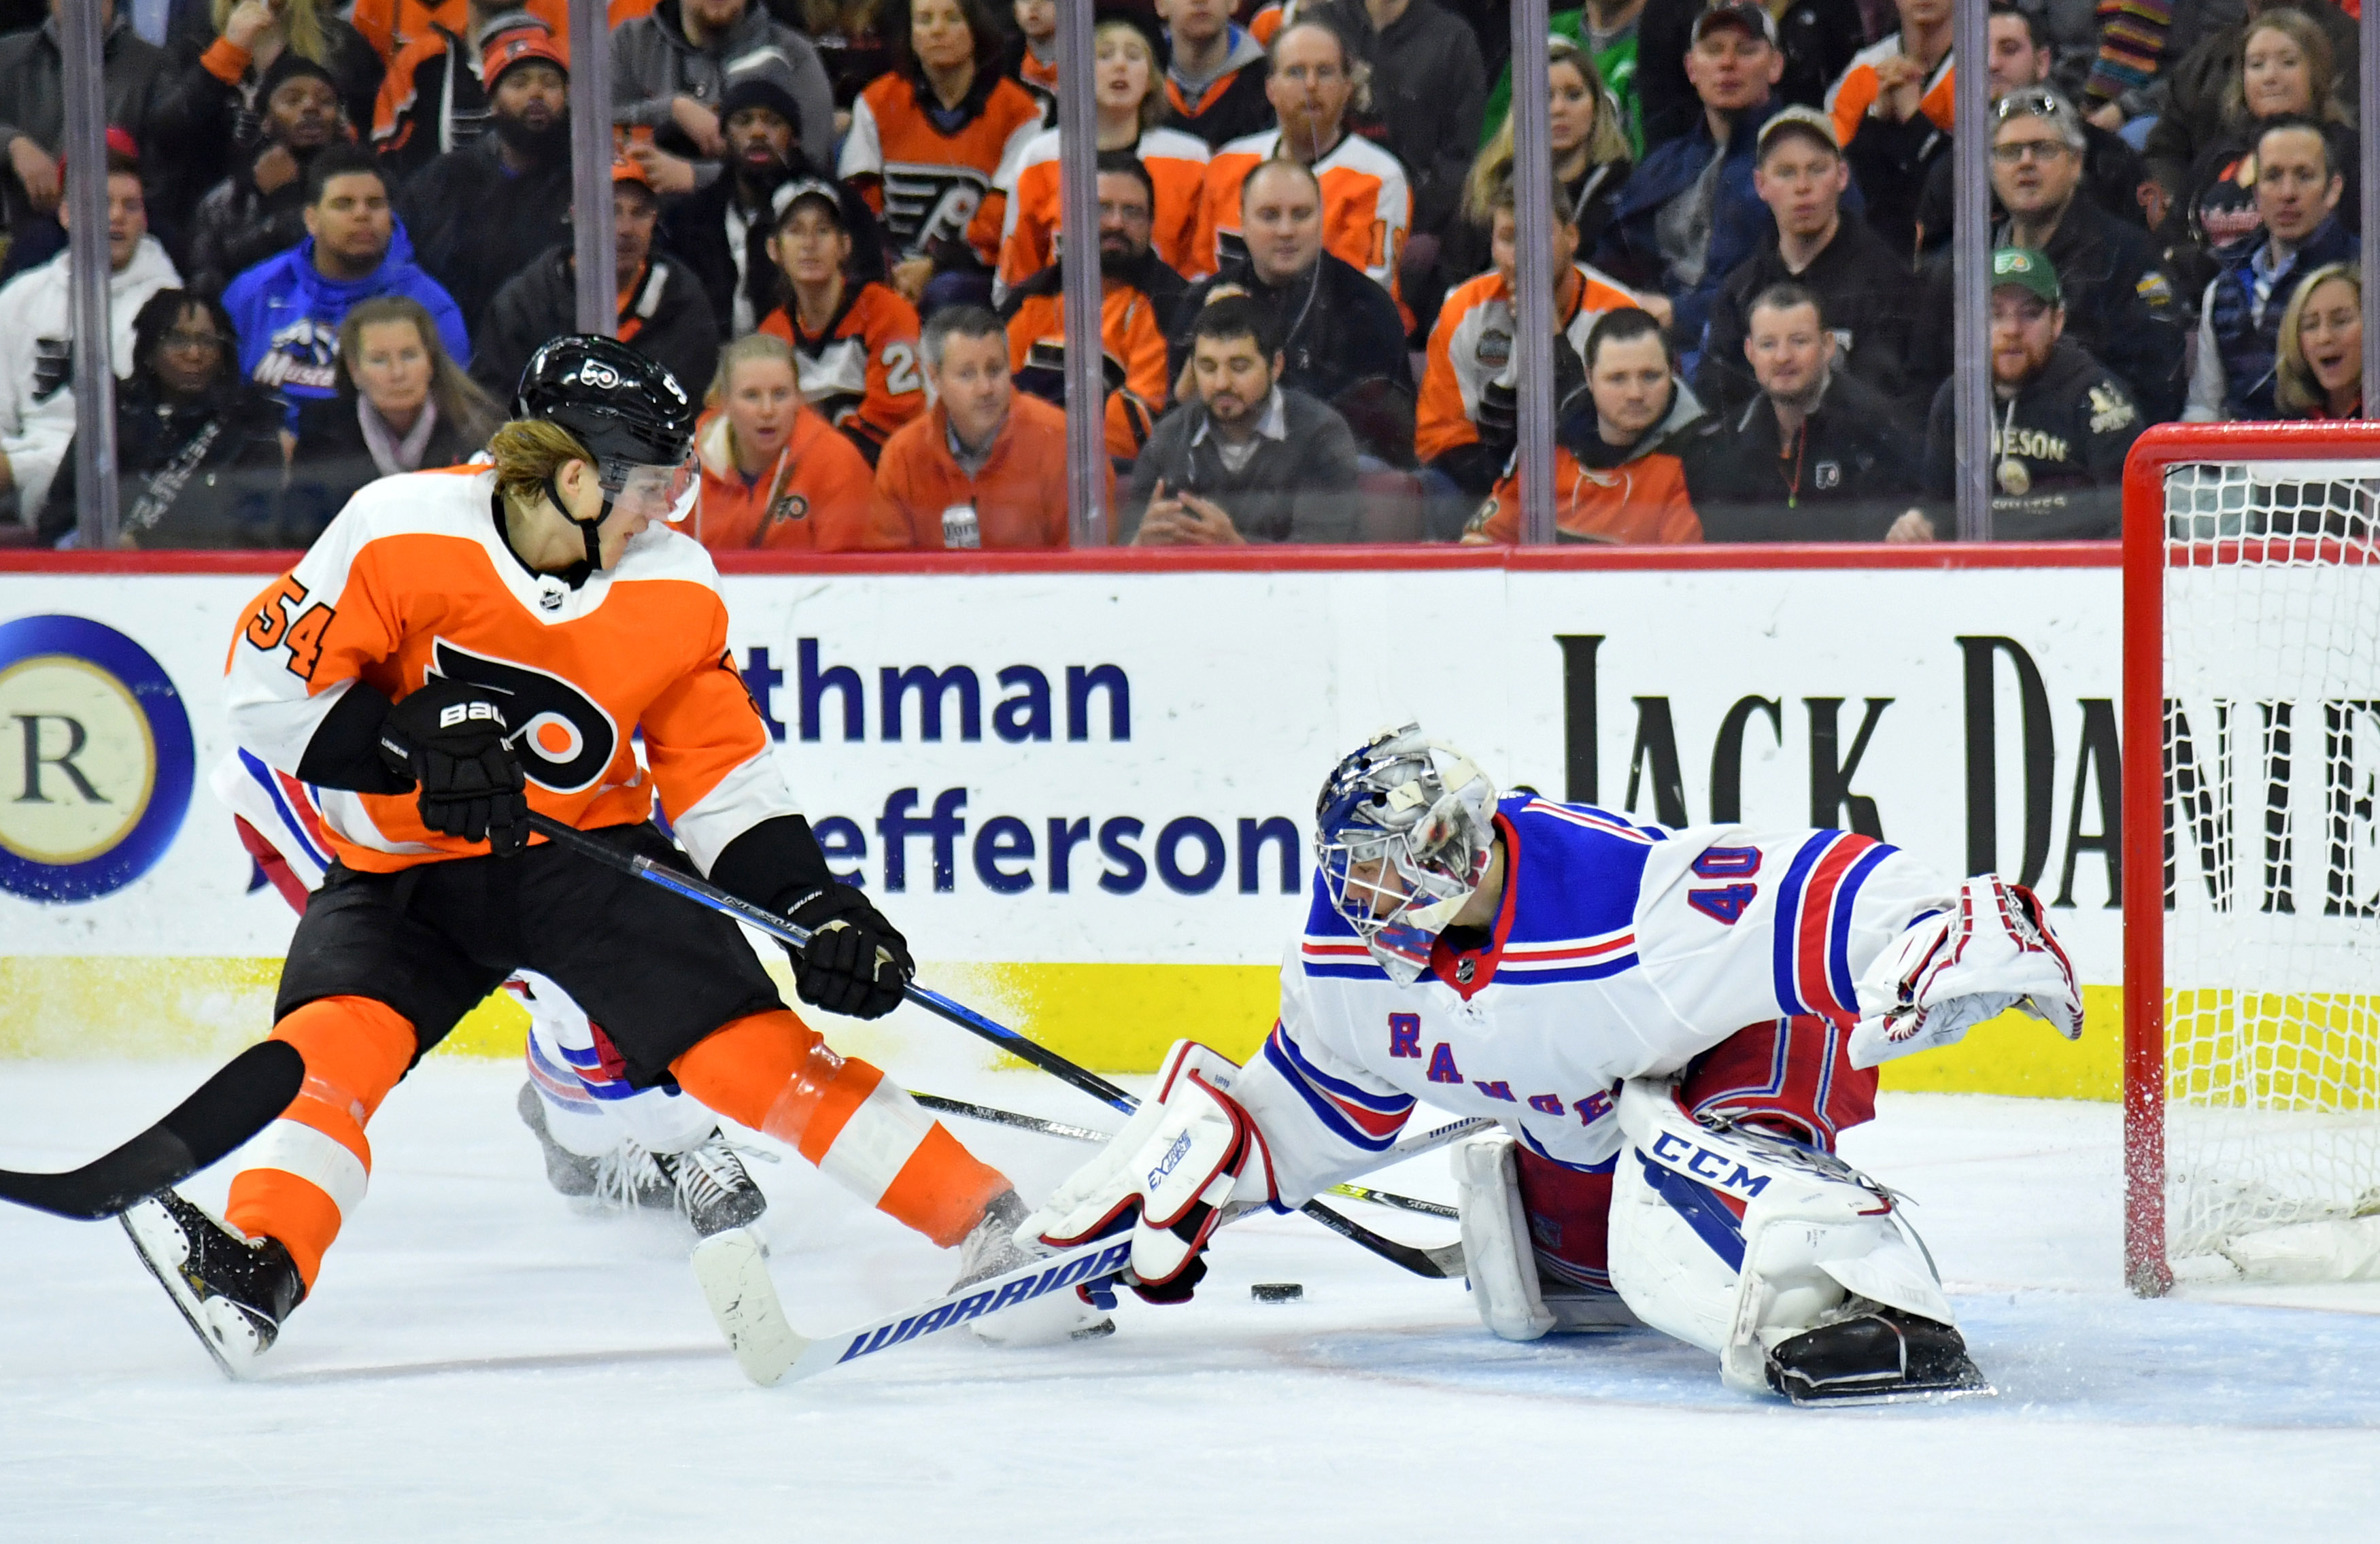 By the Skin of Their Teeth: Thoughts After Flyers 4, Rangers 3